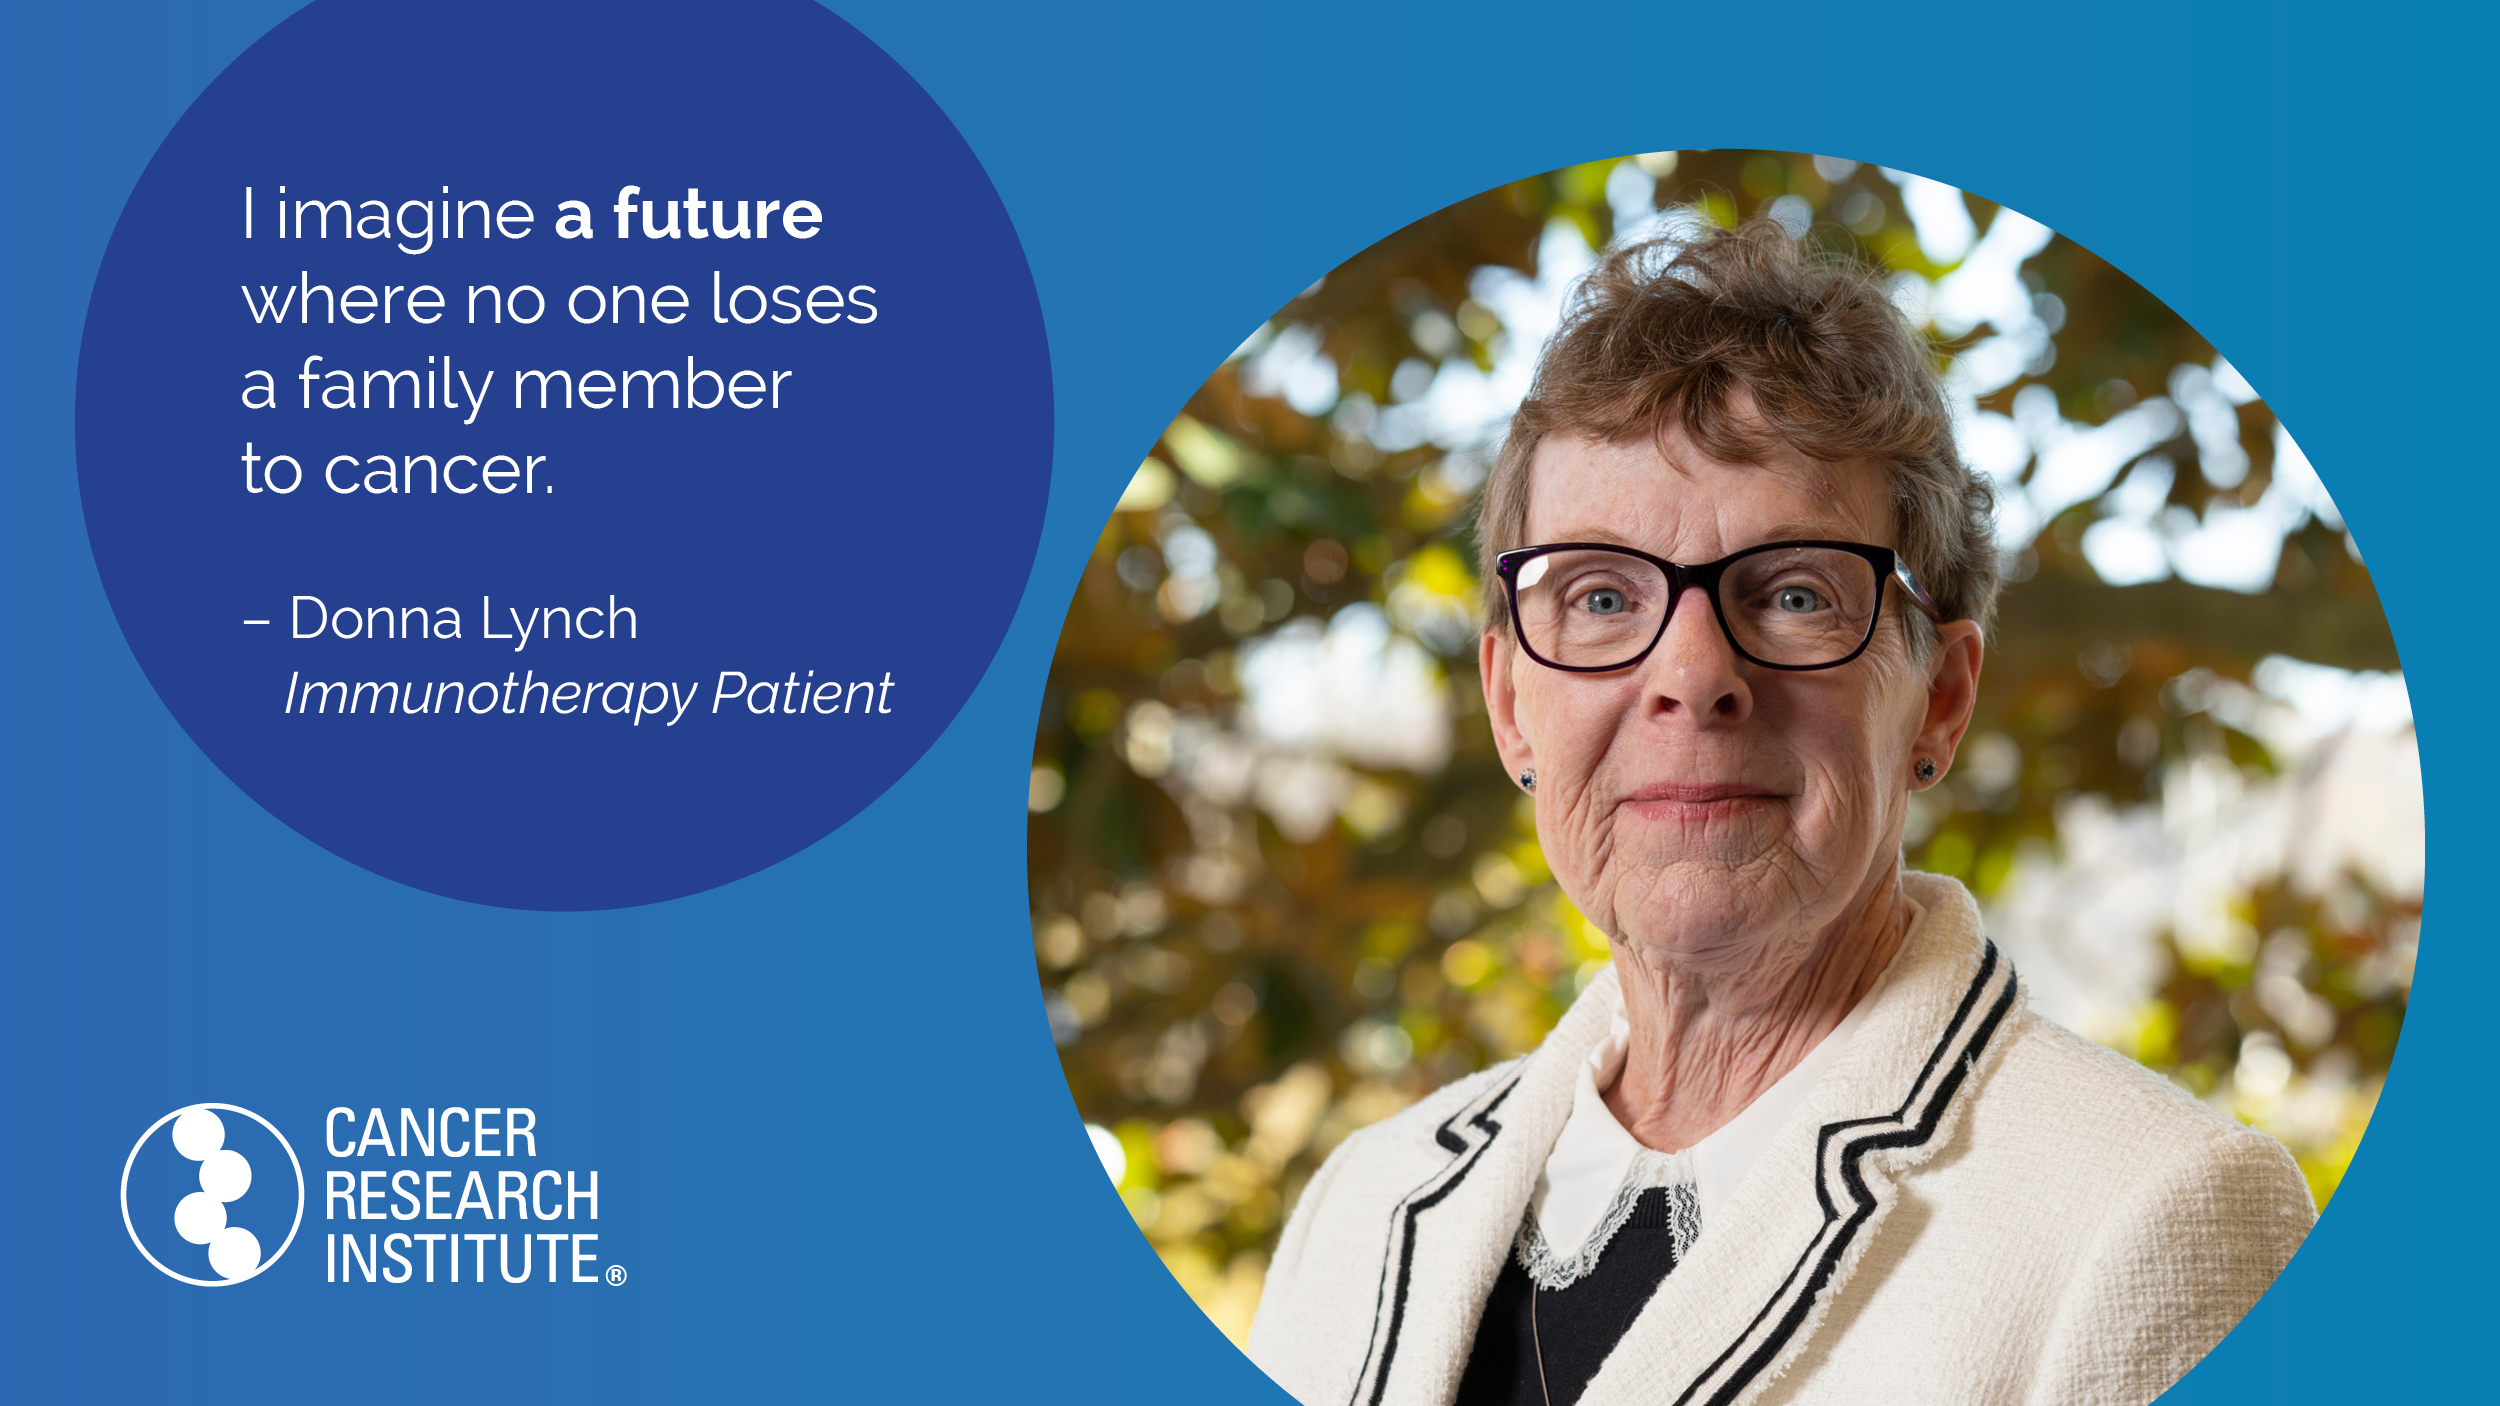 I imagine a future where no one loses a family member to cancer. -Donna, Immunotherapy Patient